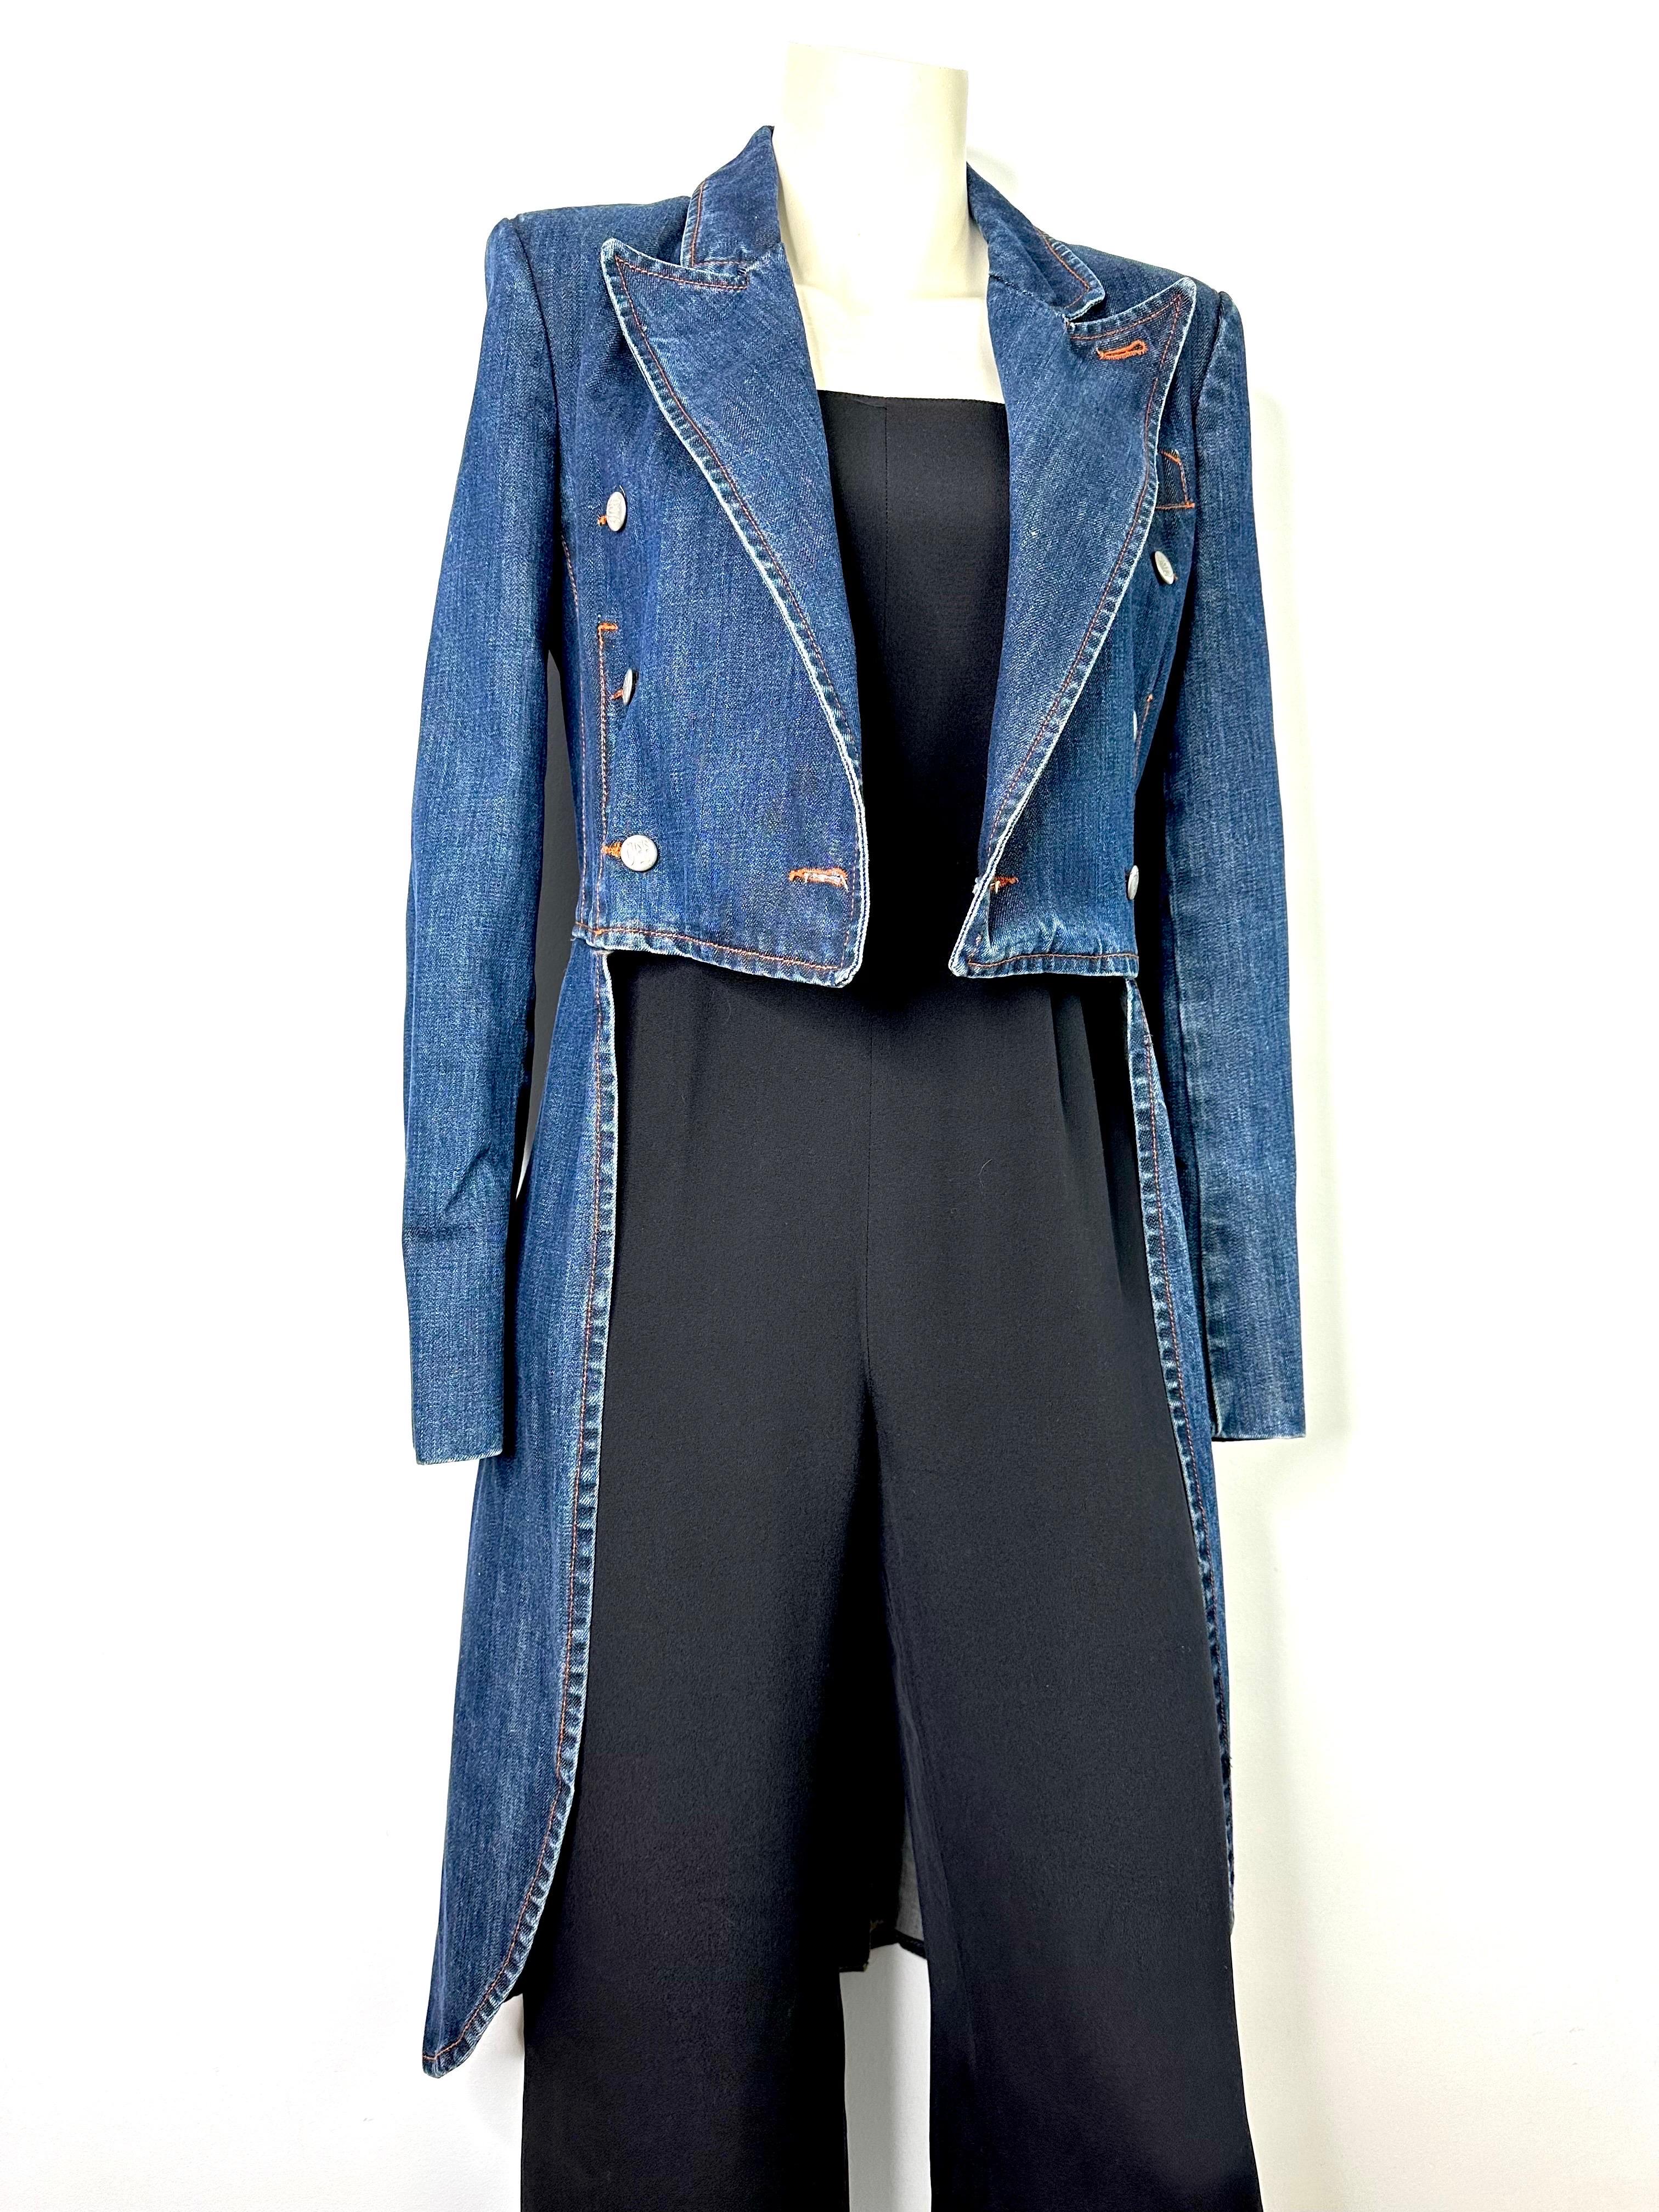 Timeless and official, the tailcoat jacket by Jean Paul Gaultier jeans, vintage from the 1990s.
Double-breasted button front, signature buttons.
Epaulets inside the lining.
Slit pleat in back
Natural denim patina.
Size 36FR
Refer to